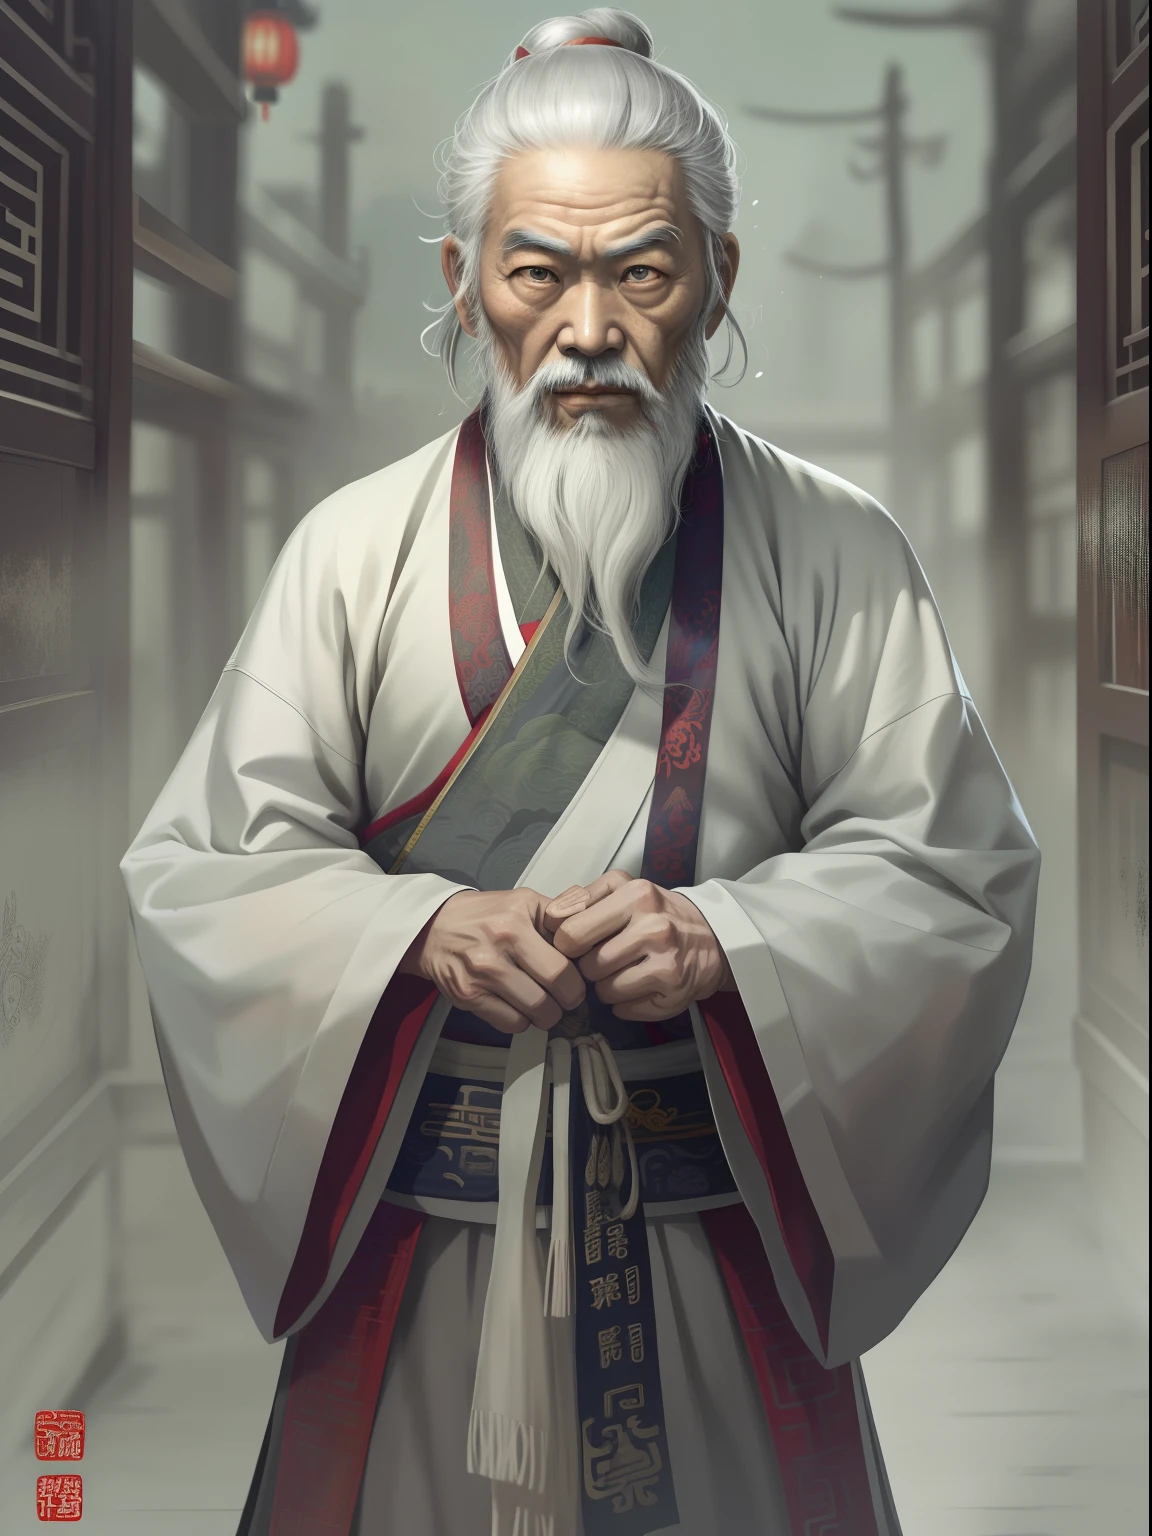 Chinese Ancient Times, An old man, Asian people，gray hair and beard, Black eyes，Thin body, Weakness of the body，standing on your feet, The background is a prison，Look at the camera with determined eyes, dressed white hanfu, There is no pattern，China-style, first person perspective, Masterpiece, ccurate, Anatomically correct, Super detail